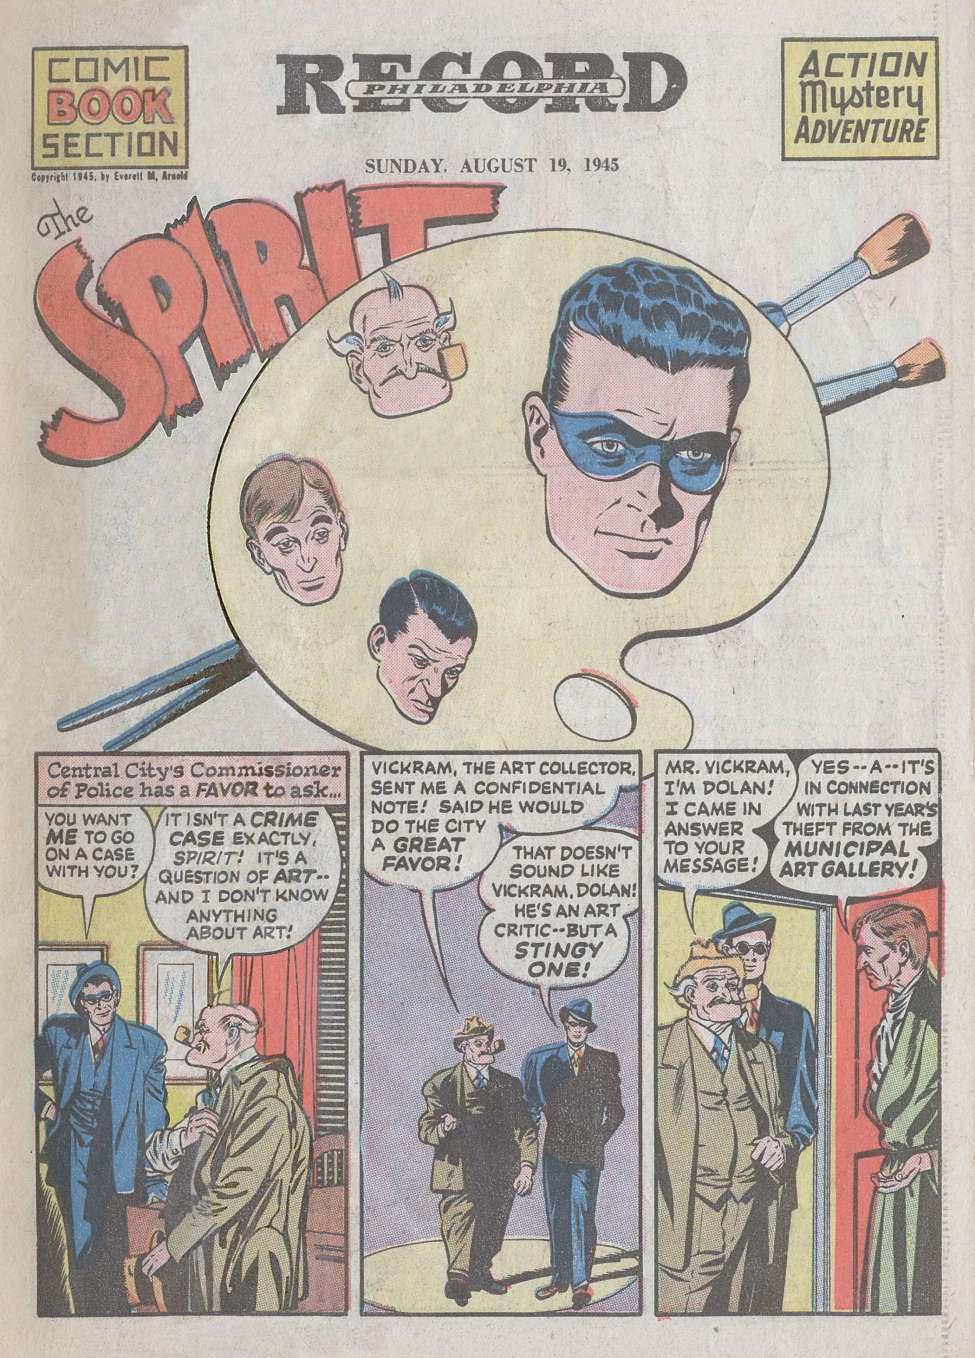 Book Cover For The Spirit (1945-08-19) - Chicago Sun